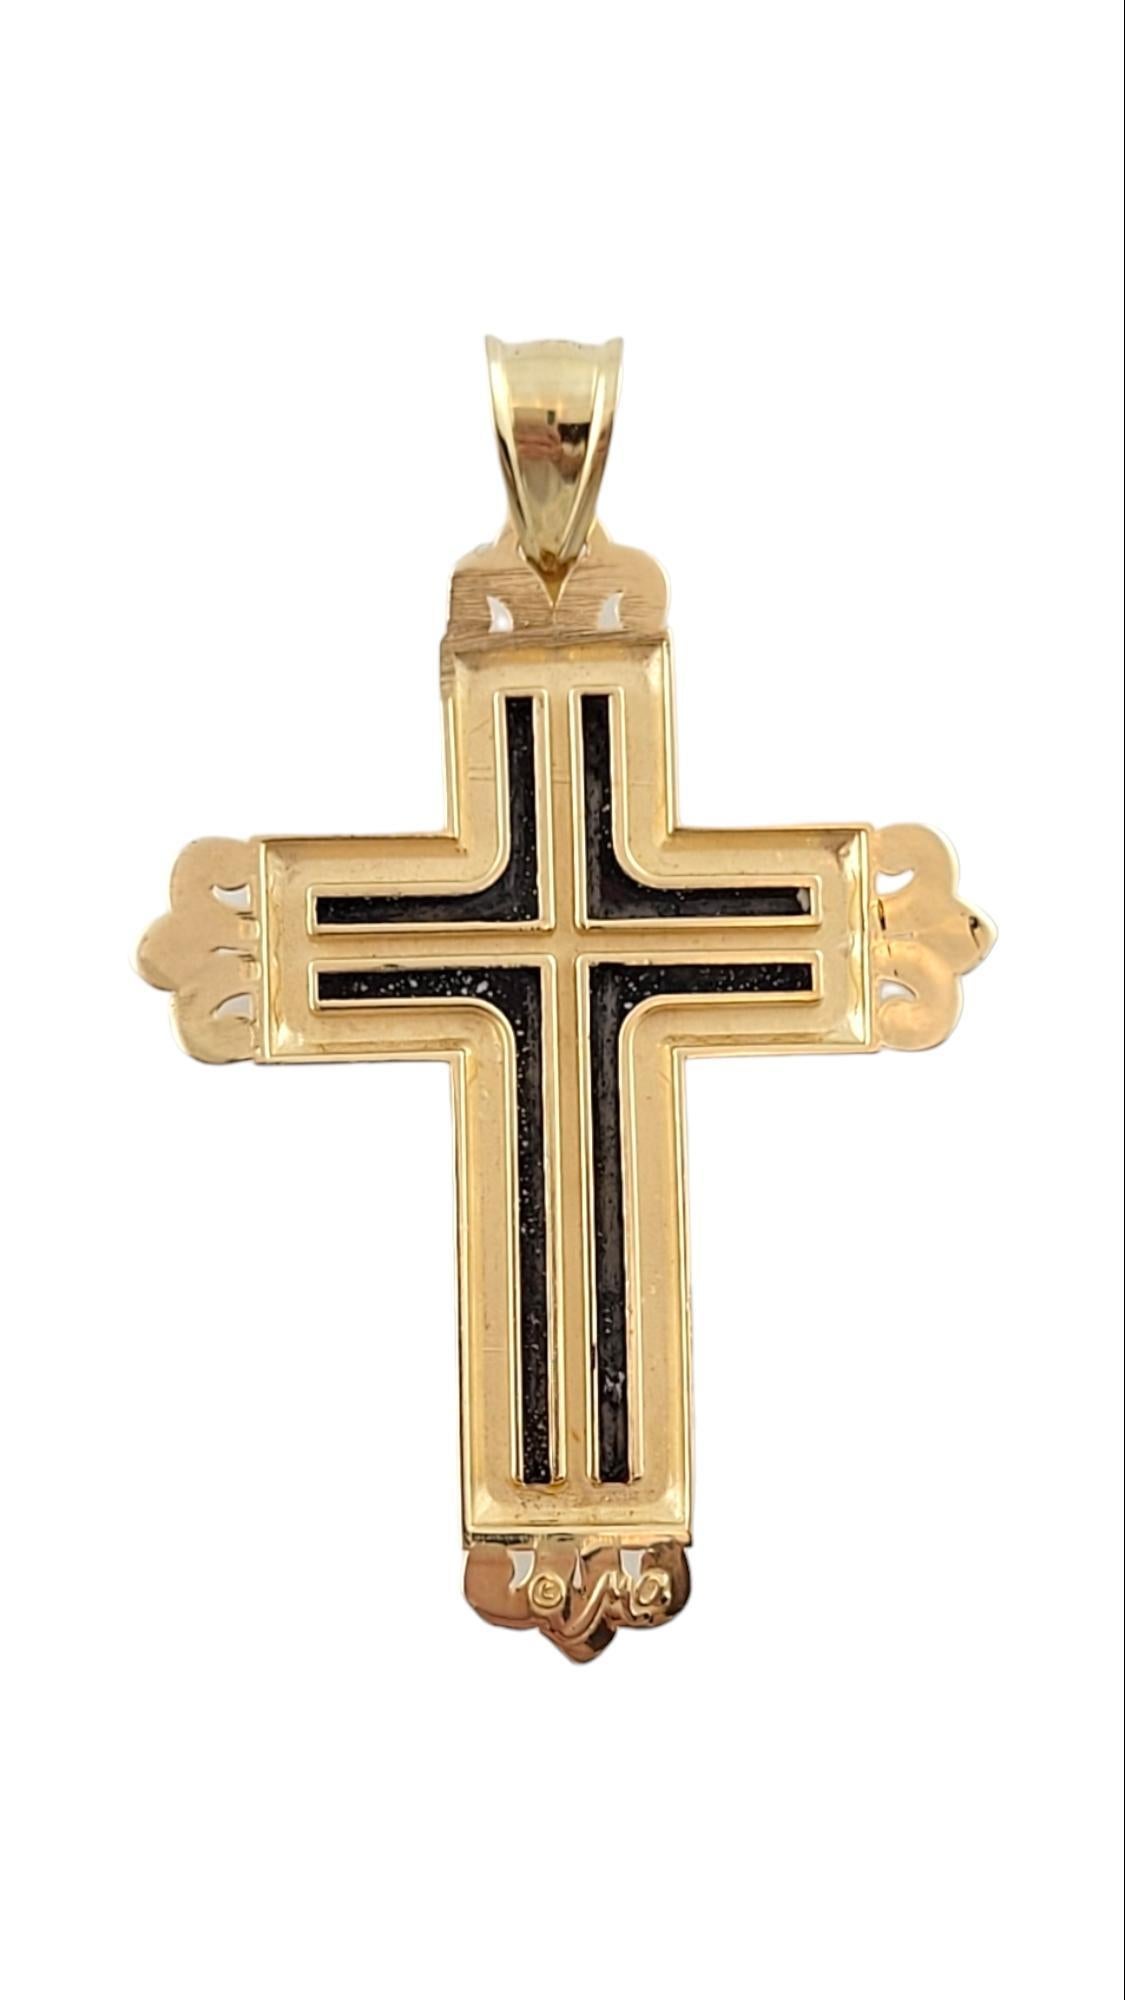 Vintage 14K Yellow Gold Reversible Cross Pendant

This gorgeous 14K gold pendant is reversible so you can get 2 different, beautiful looks!

Size: 36.9mm X 27.1mm X 2.7mm

Weight: 4.2 g/ 2.7 dwt

Hallmark: 14K MA

Very good condition, professionally